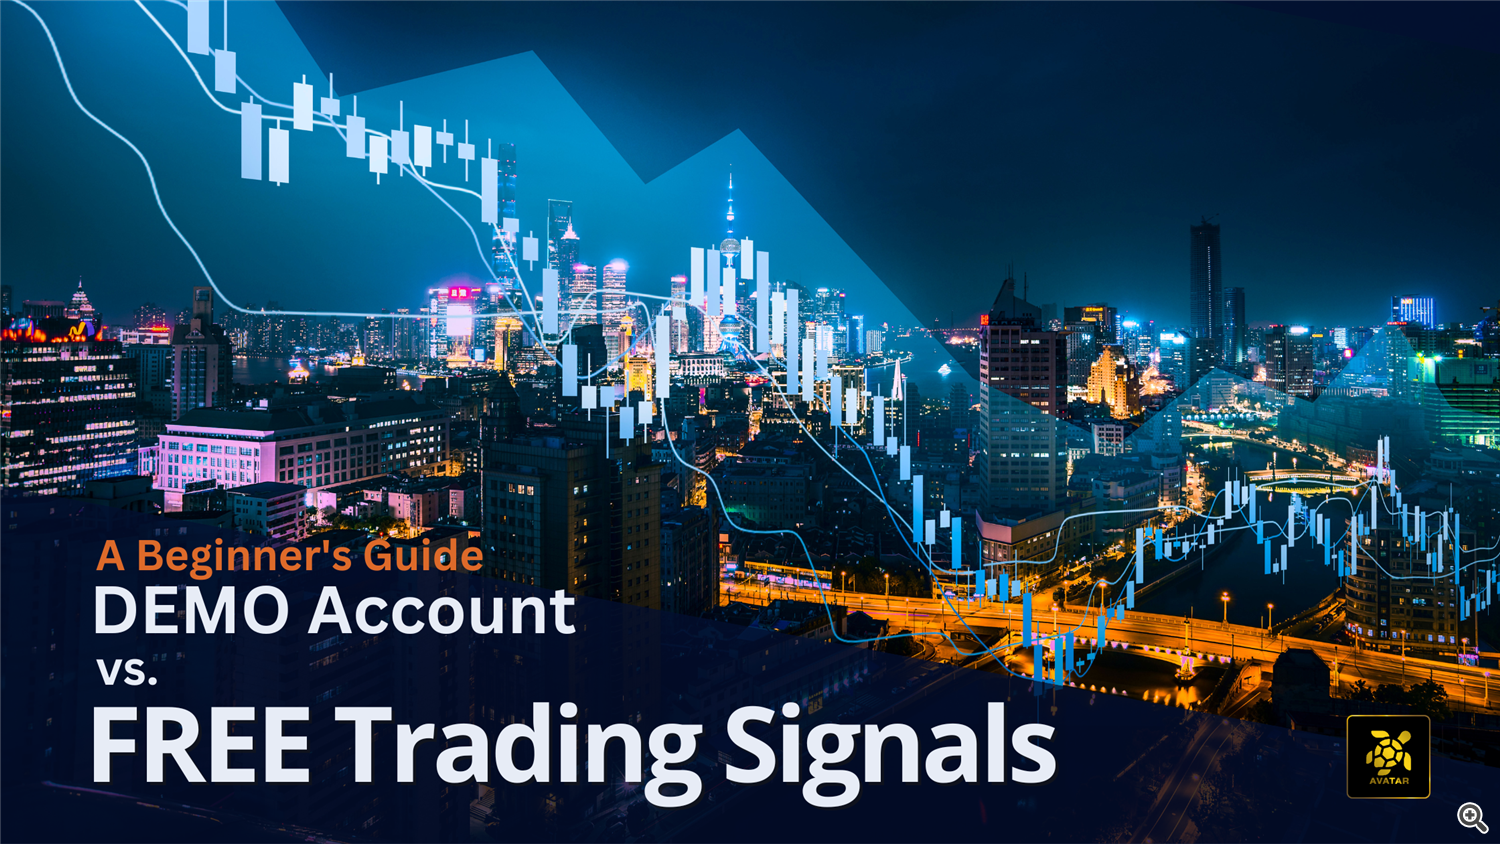 https://forex-signalshub.com/free-trading-signals-with-a-demo-account-a-beginners-guide/